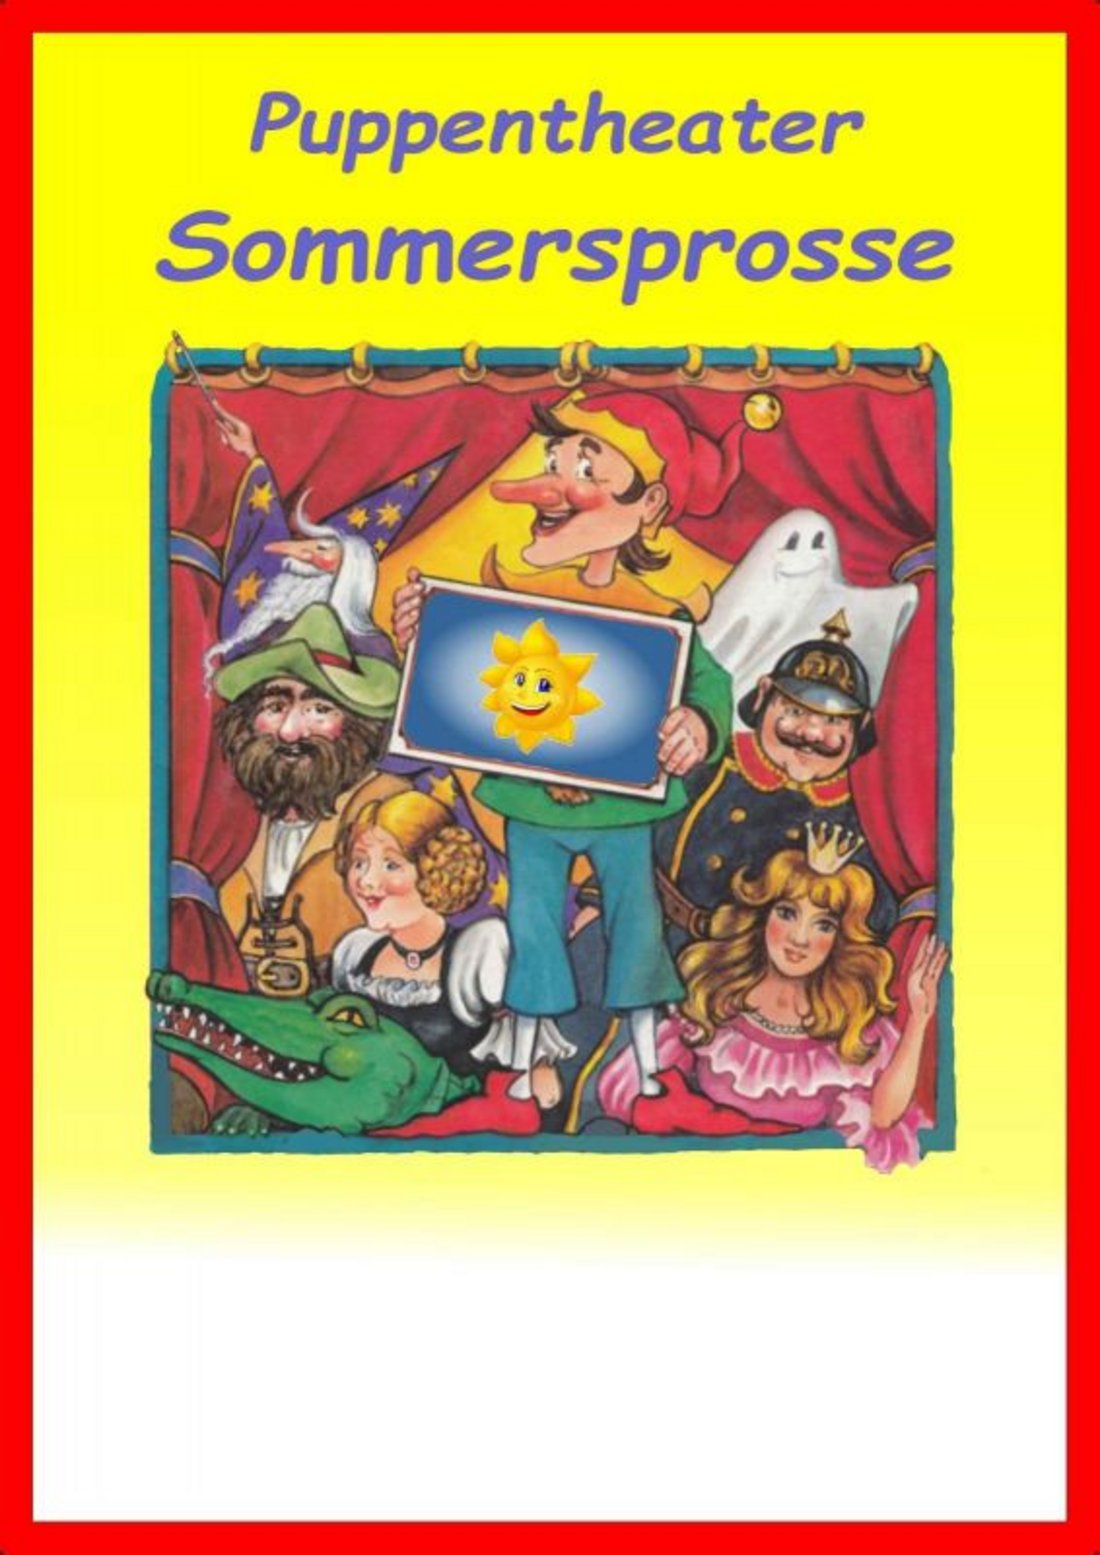 Puppentheater Sommersprosse